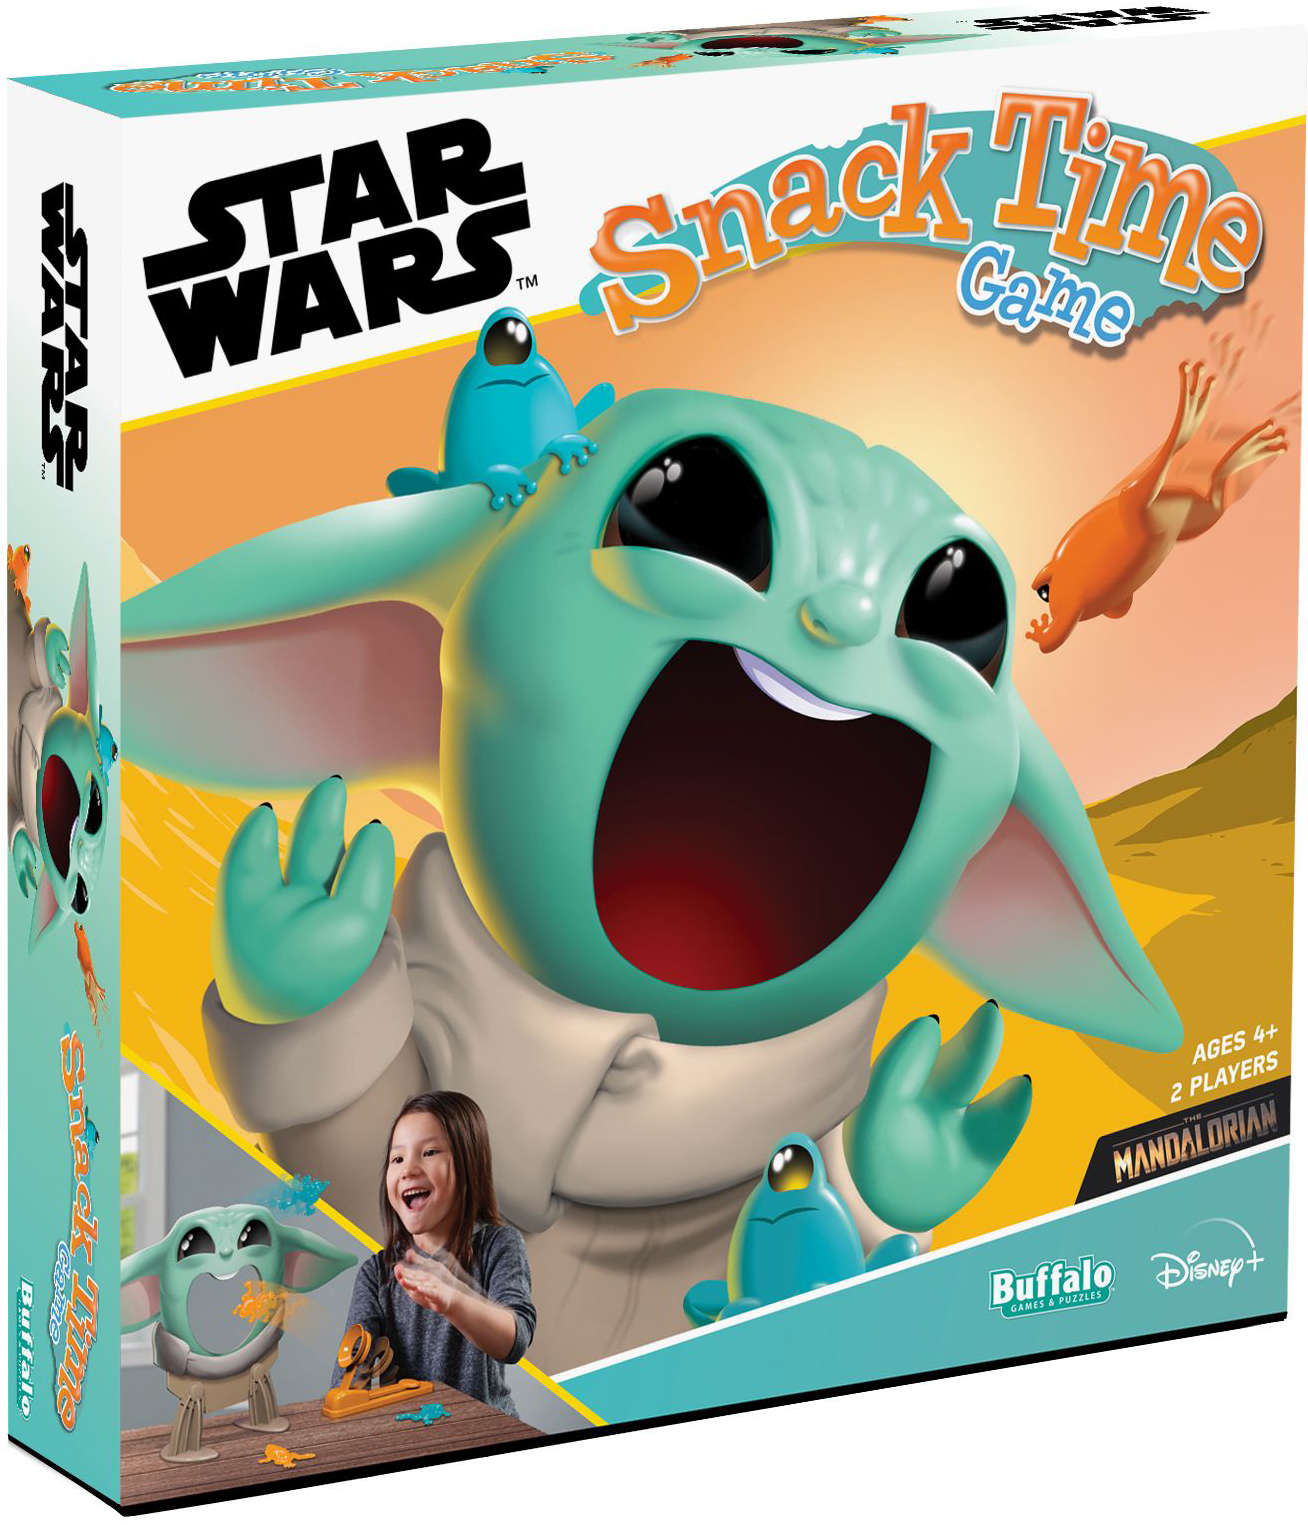 Star Wars™ Snack Time Game